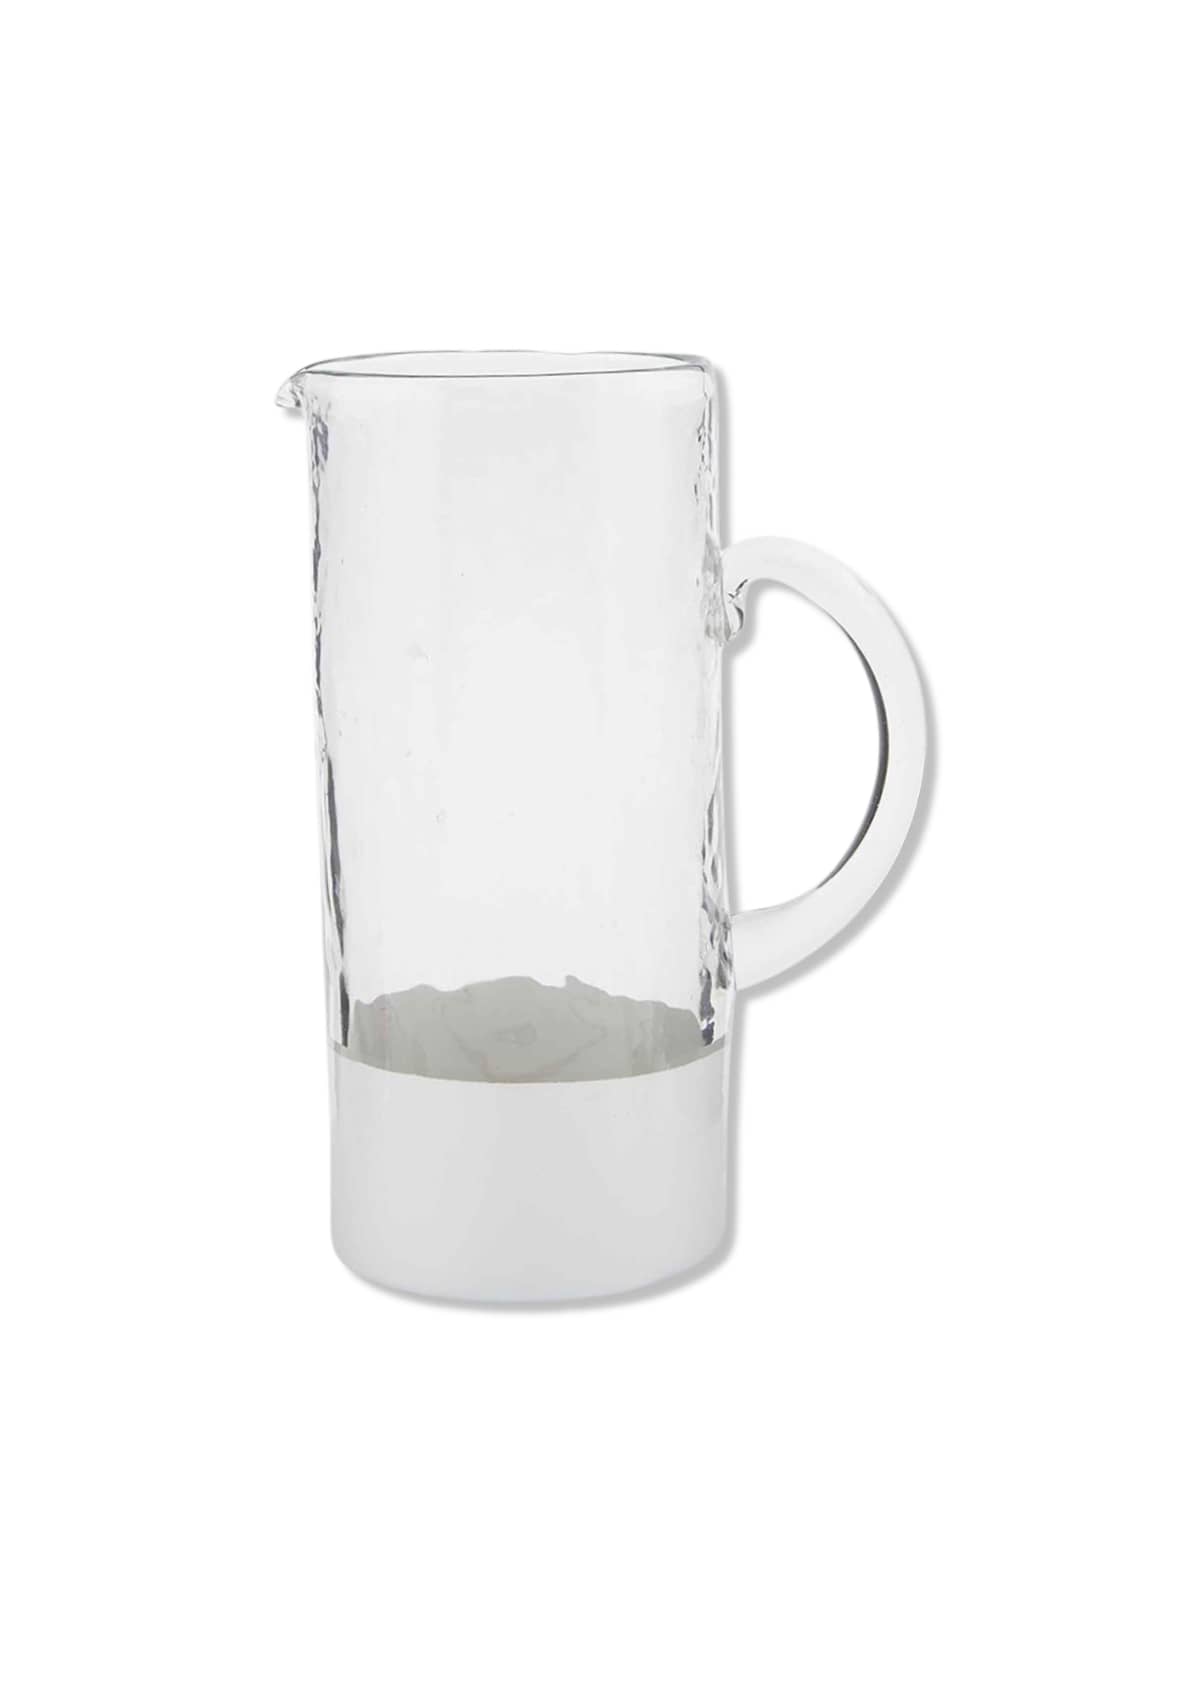 Glass with white solid on bottom. Handle.